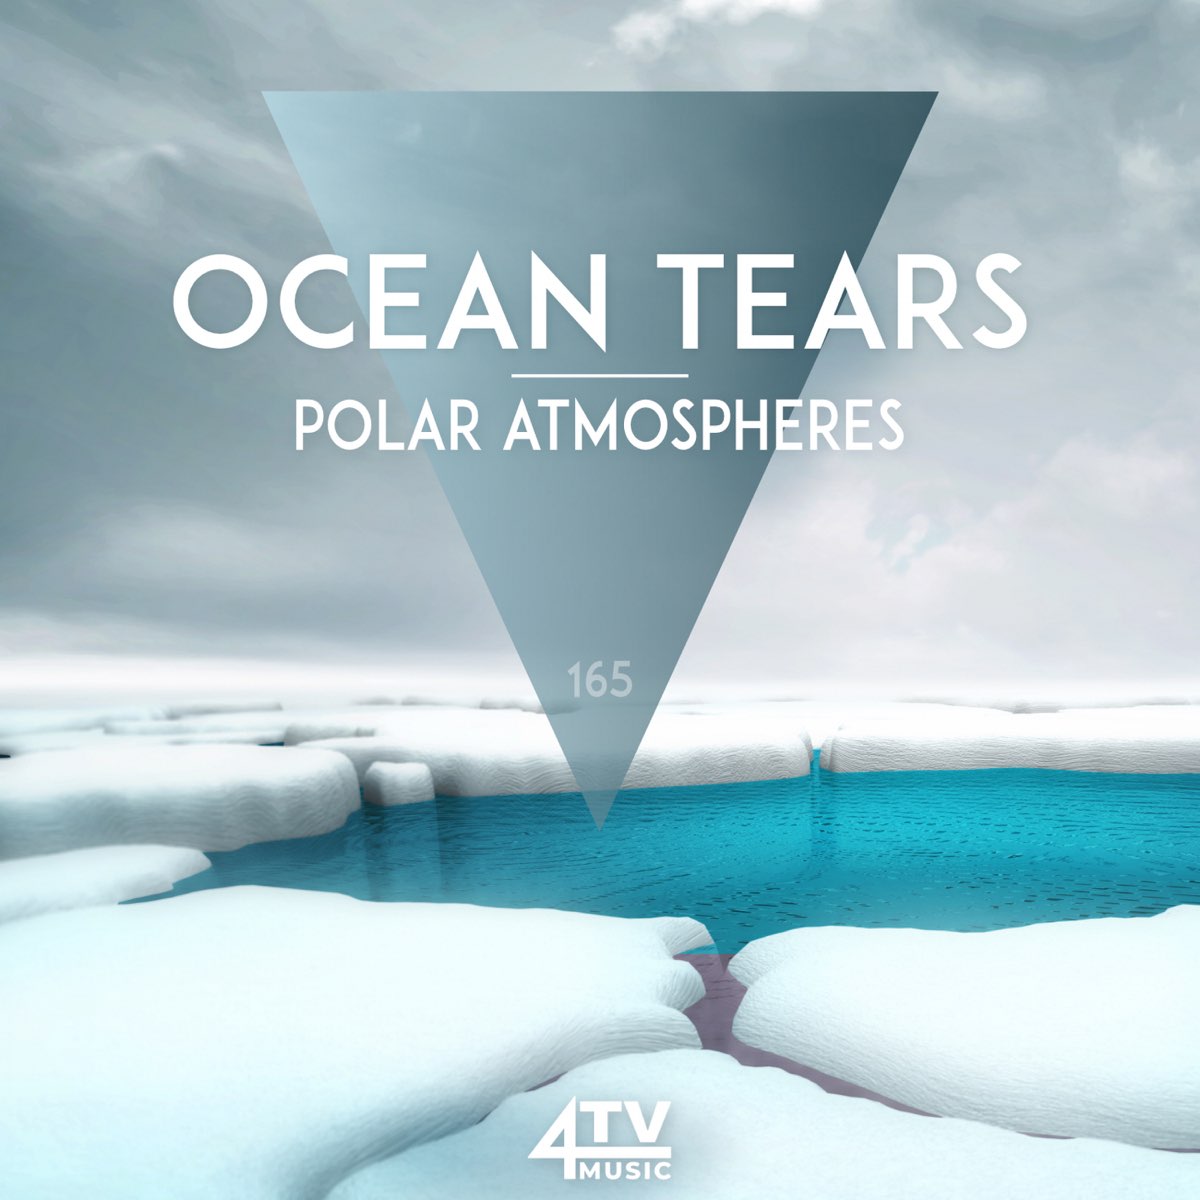 Cold tears. Ocean of tears. Fight Cold.